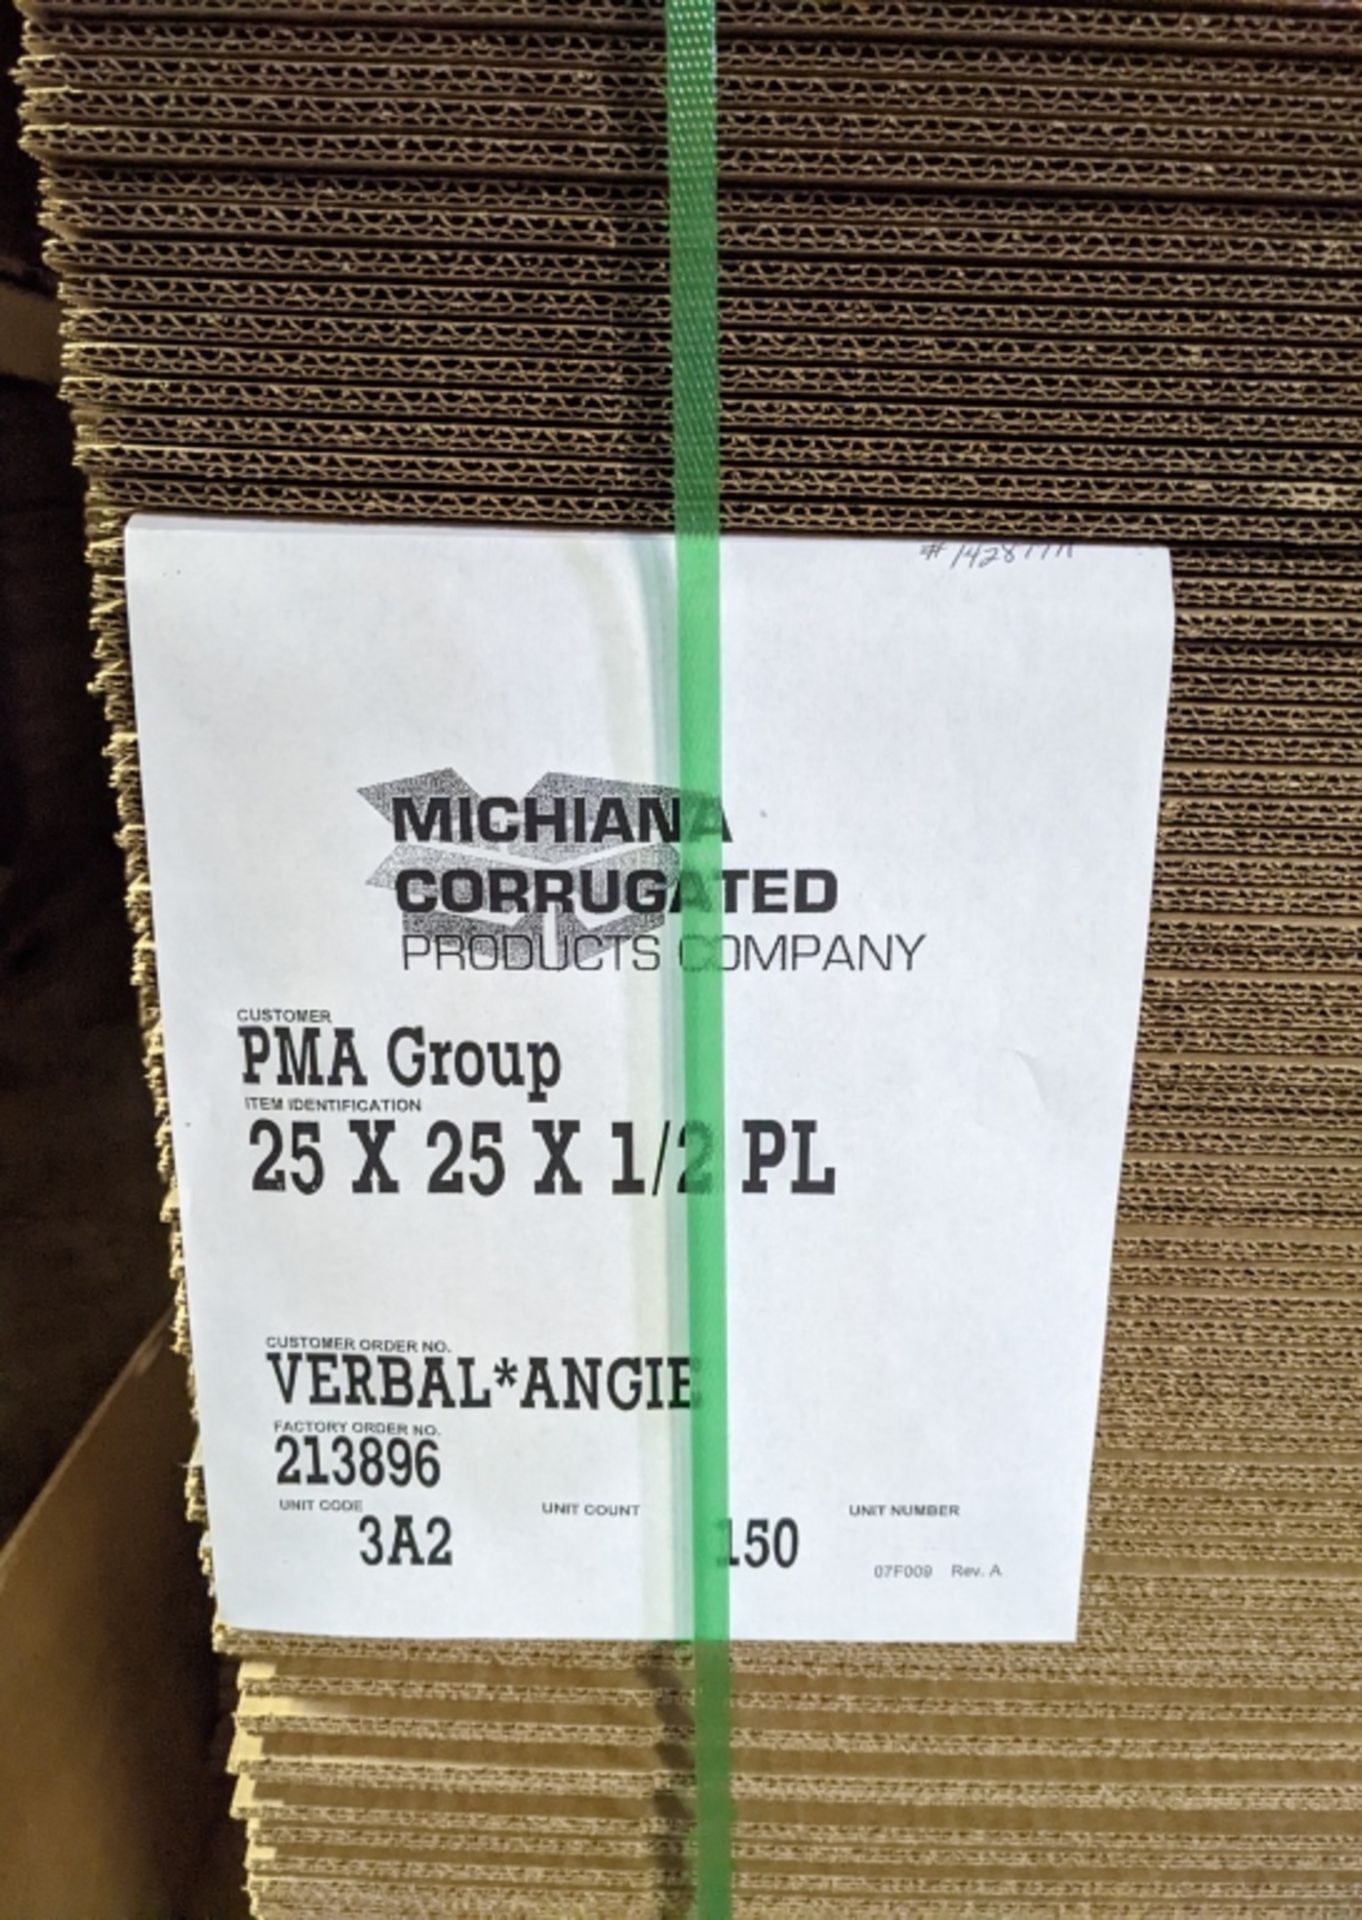 Michigan Corrugated Products Co. - Image 3 of 3